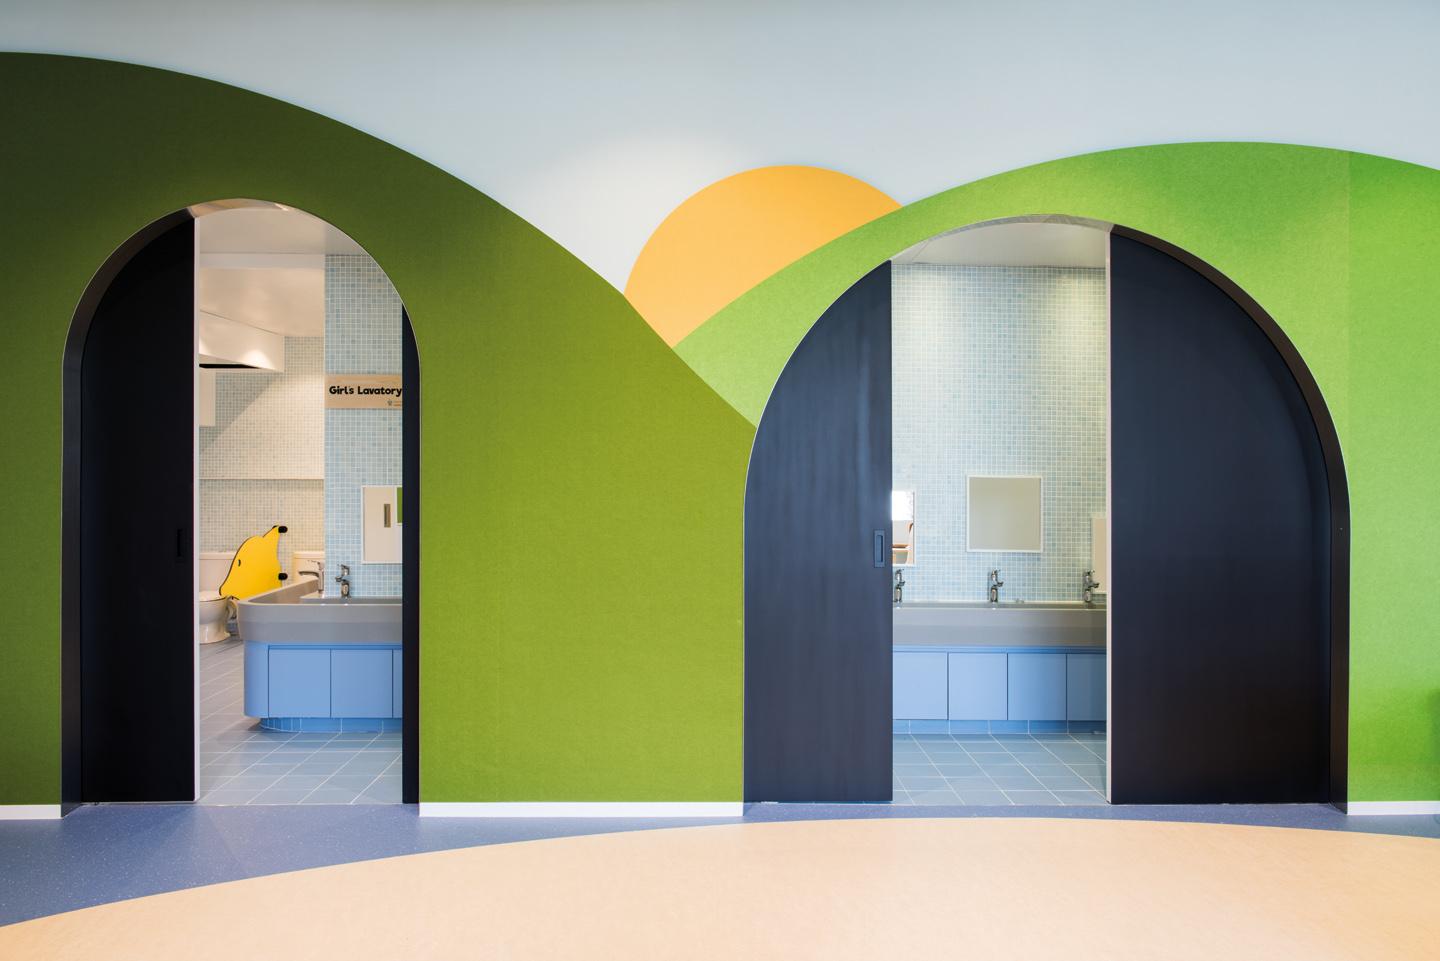 Sound-absorptive materials have also been incorporated to manage acoustics within the premises